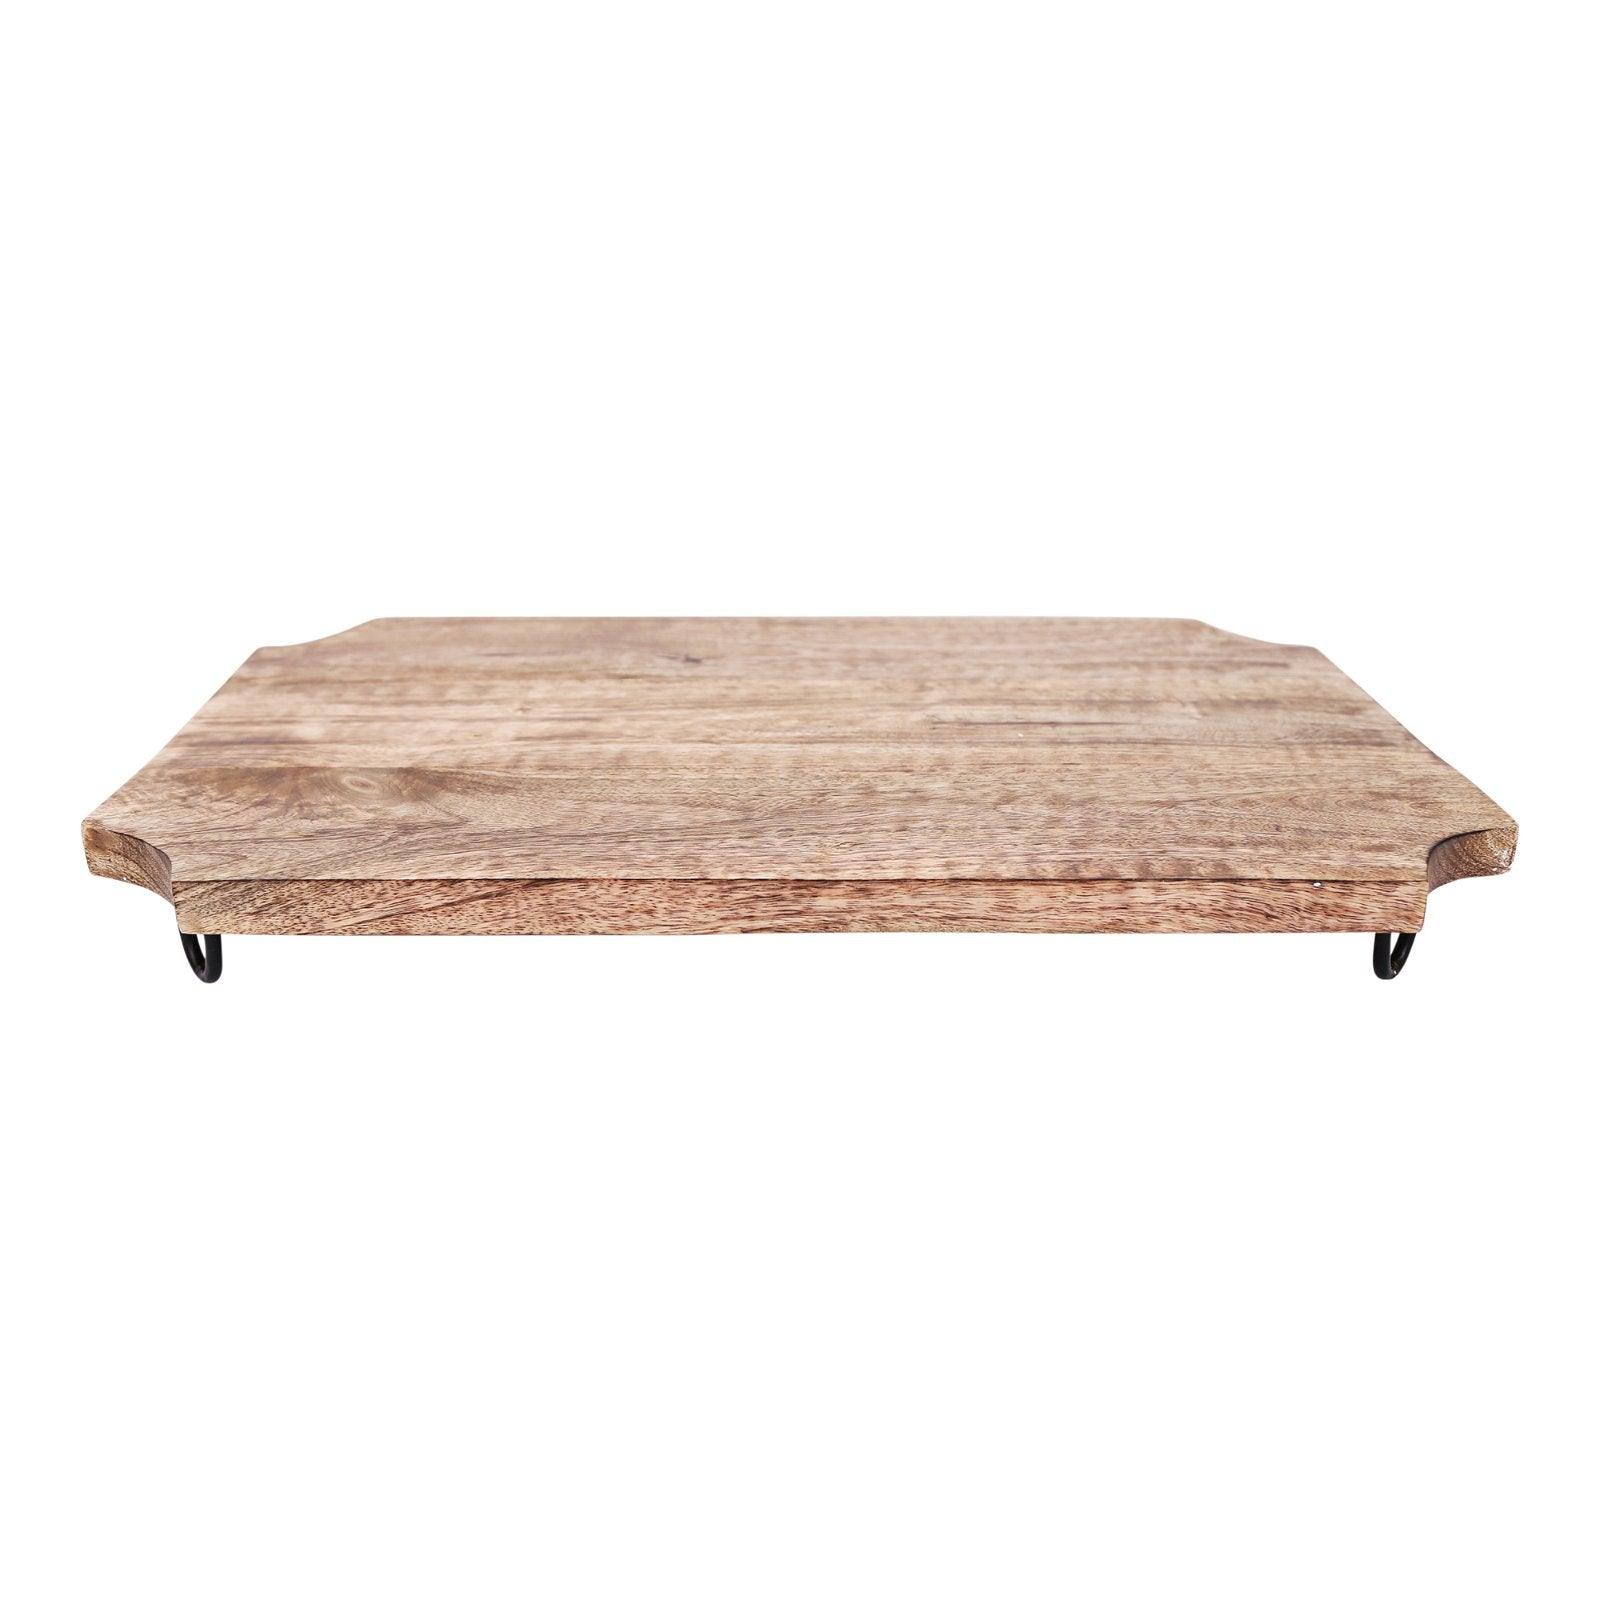 Wooden Distressed Chopping Board On Legs 51cm-Trays & Chopping Boards